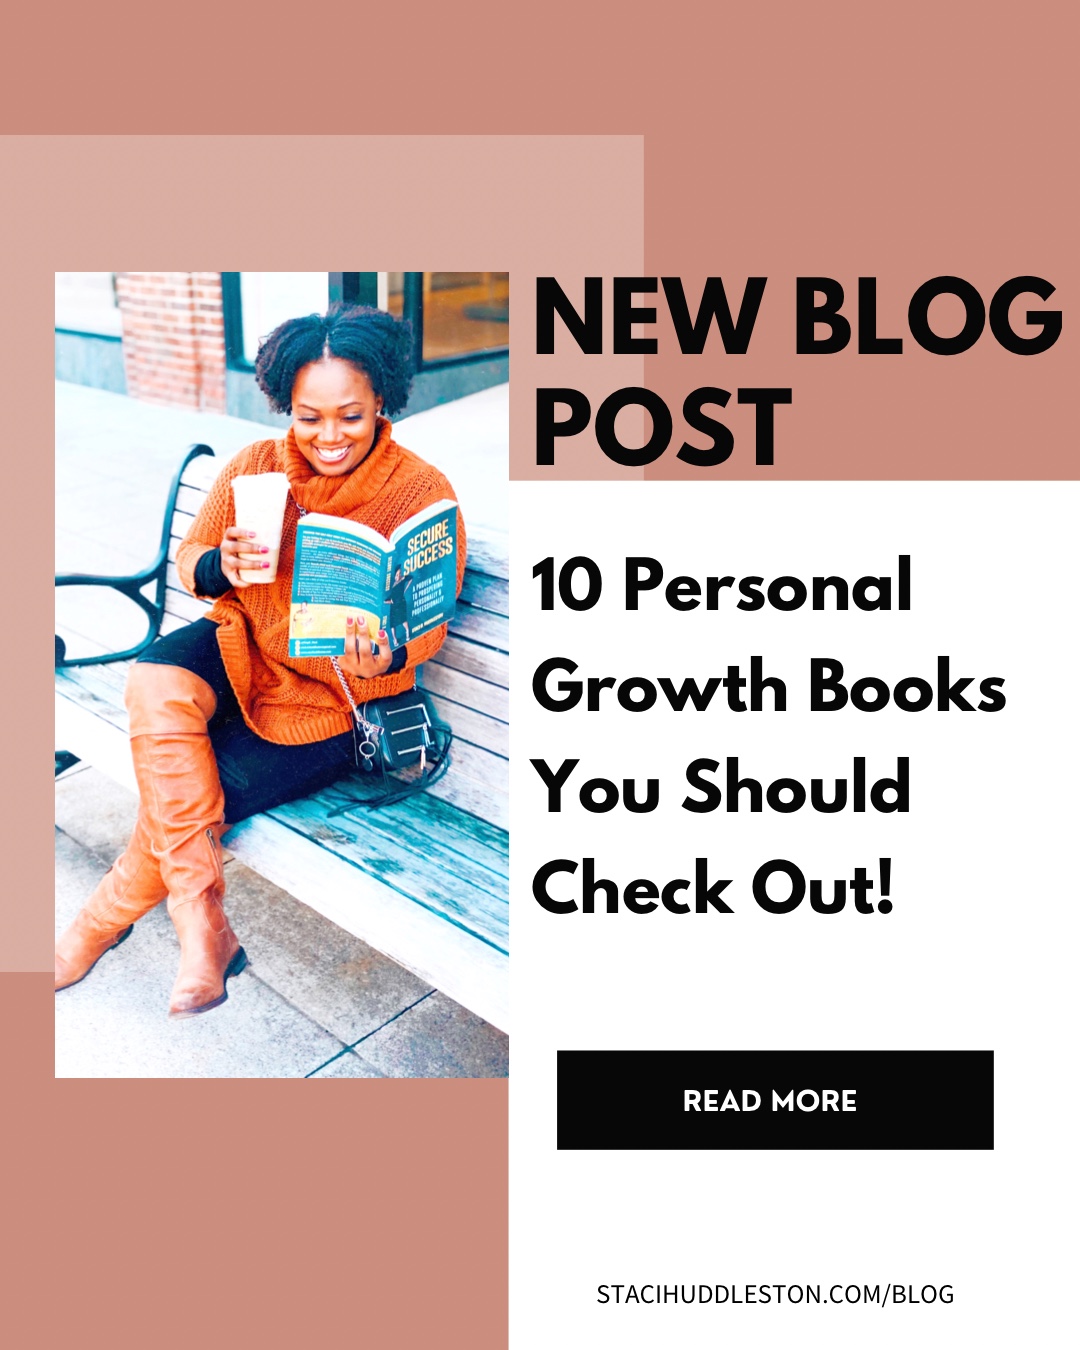 10 Personal Growth Books To Check Out!